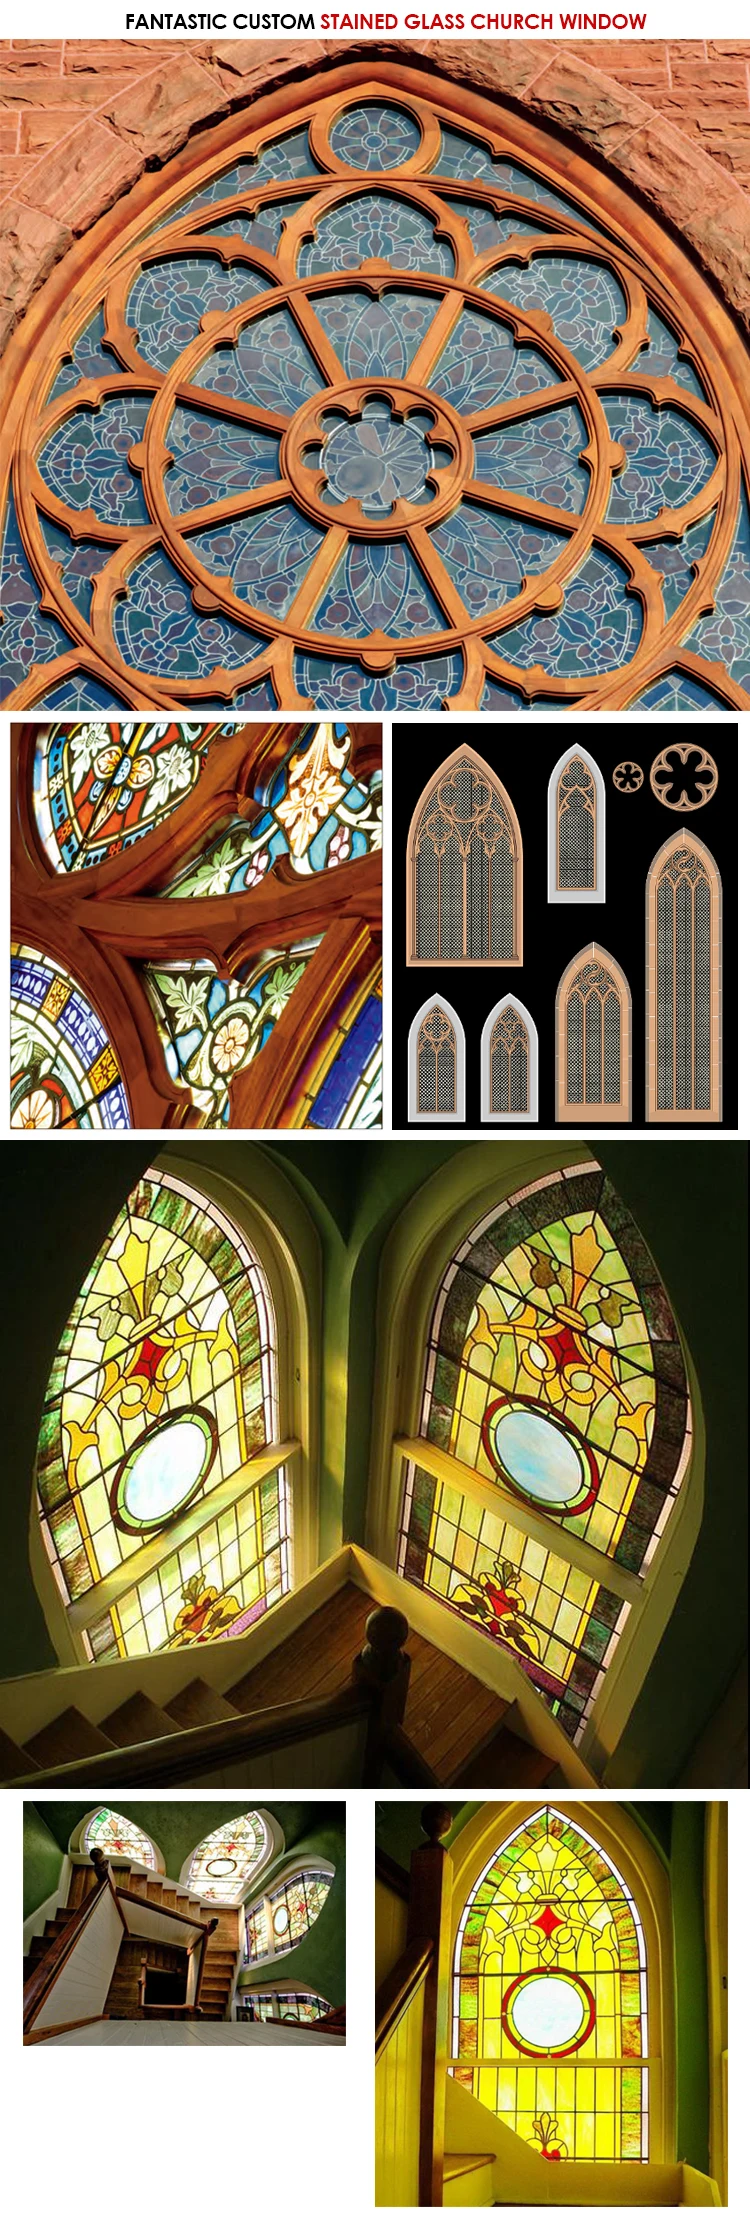 Manufactory direct pictures of stained glass windows